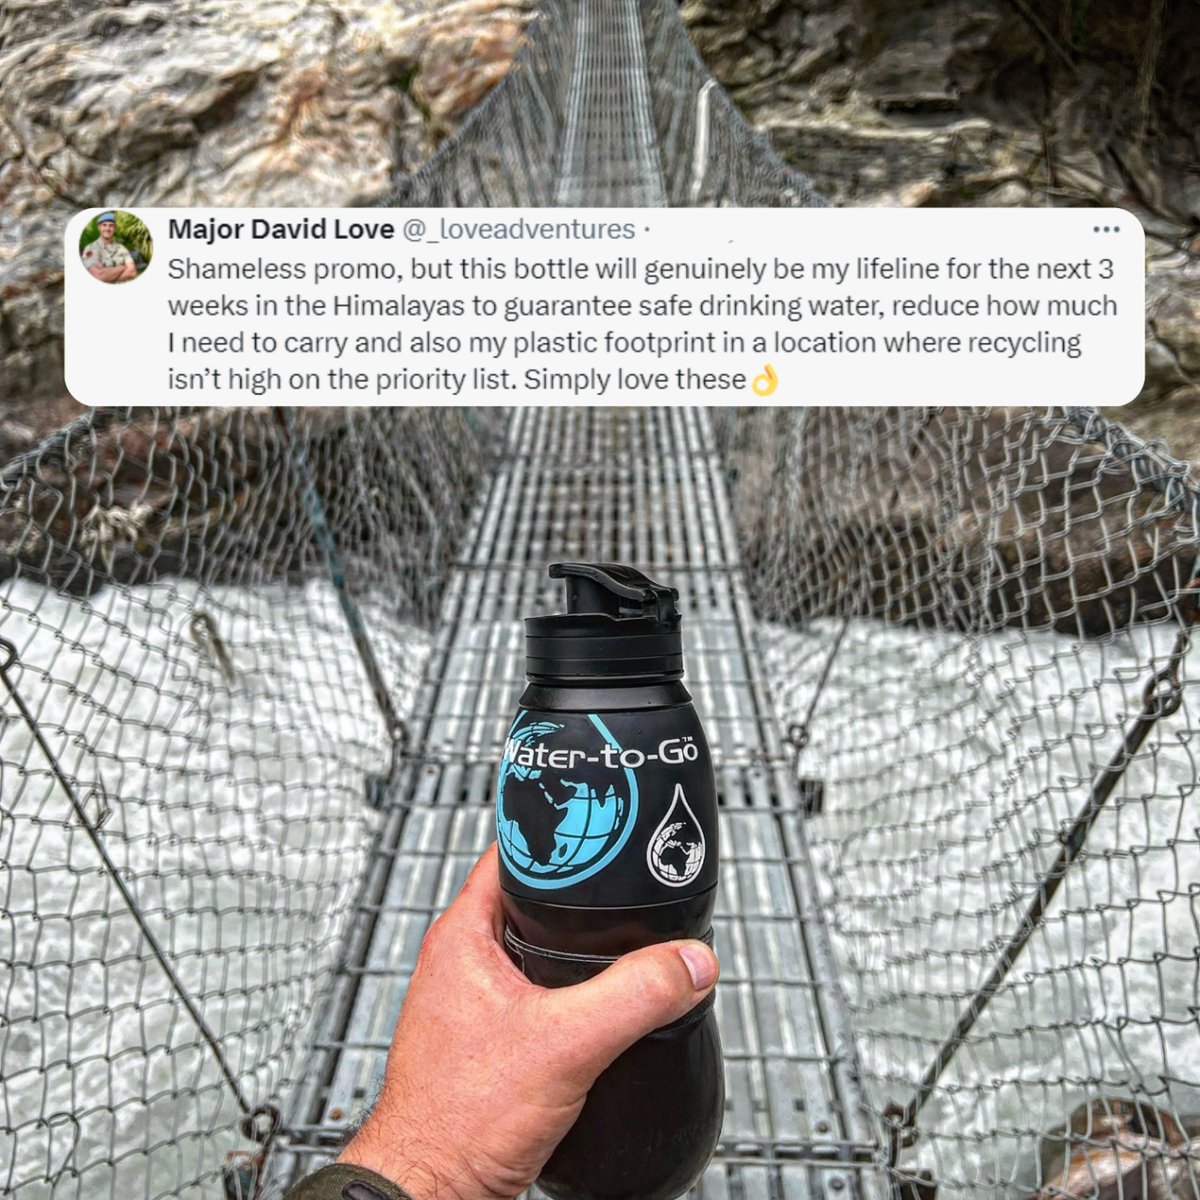 Water-to-Go has reached amazing heights... up the Himalayas with: 💧 Guaranteed safe drinking water 💧 Lighter load 💧 Lowered carbon footprint Planning a trip? Save £5 on twin filters with code Subs5! 🛒 #himalayas #mountainhike #trekking #hikingessentials #safedrinkingwater